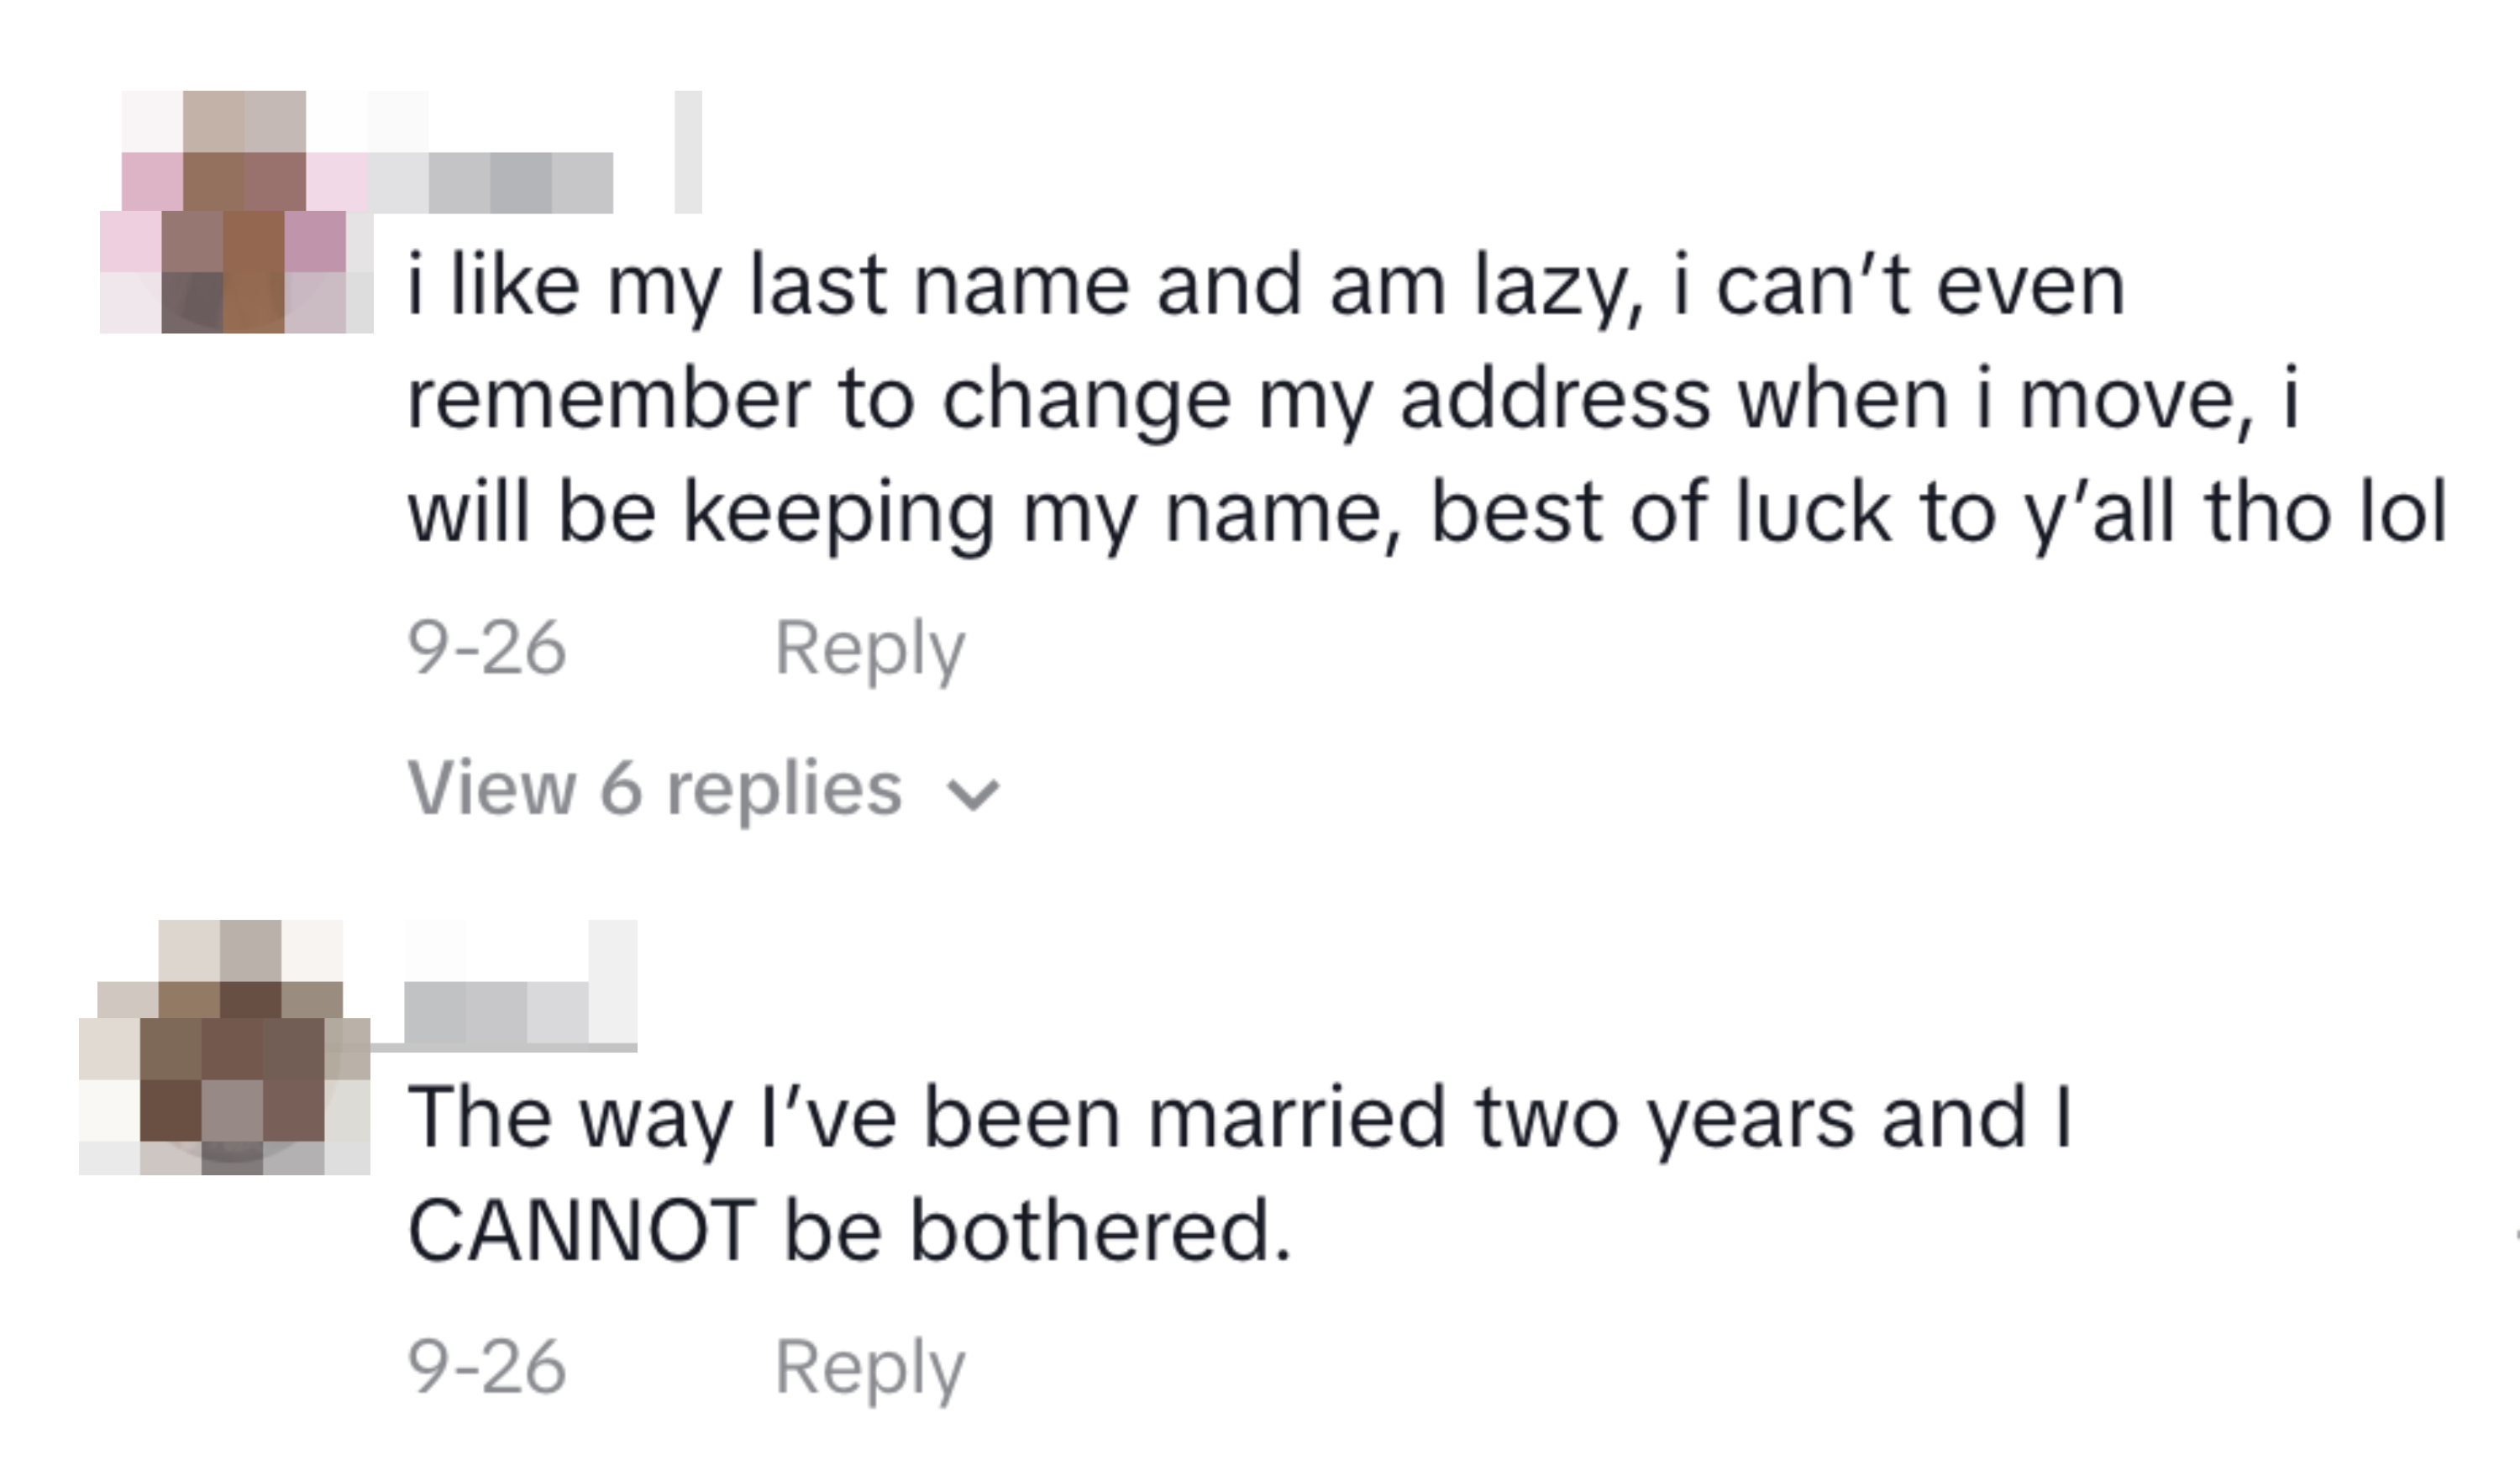 &quot;i like my last name and am lazy...&quot;